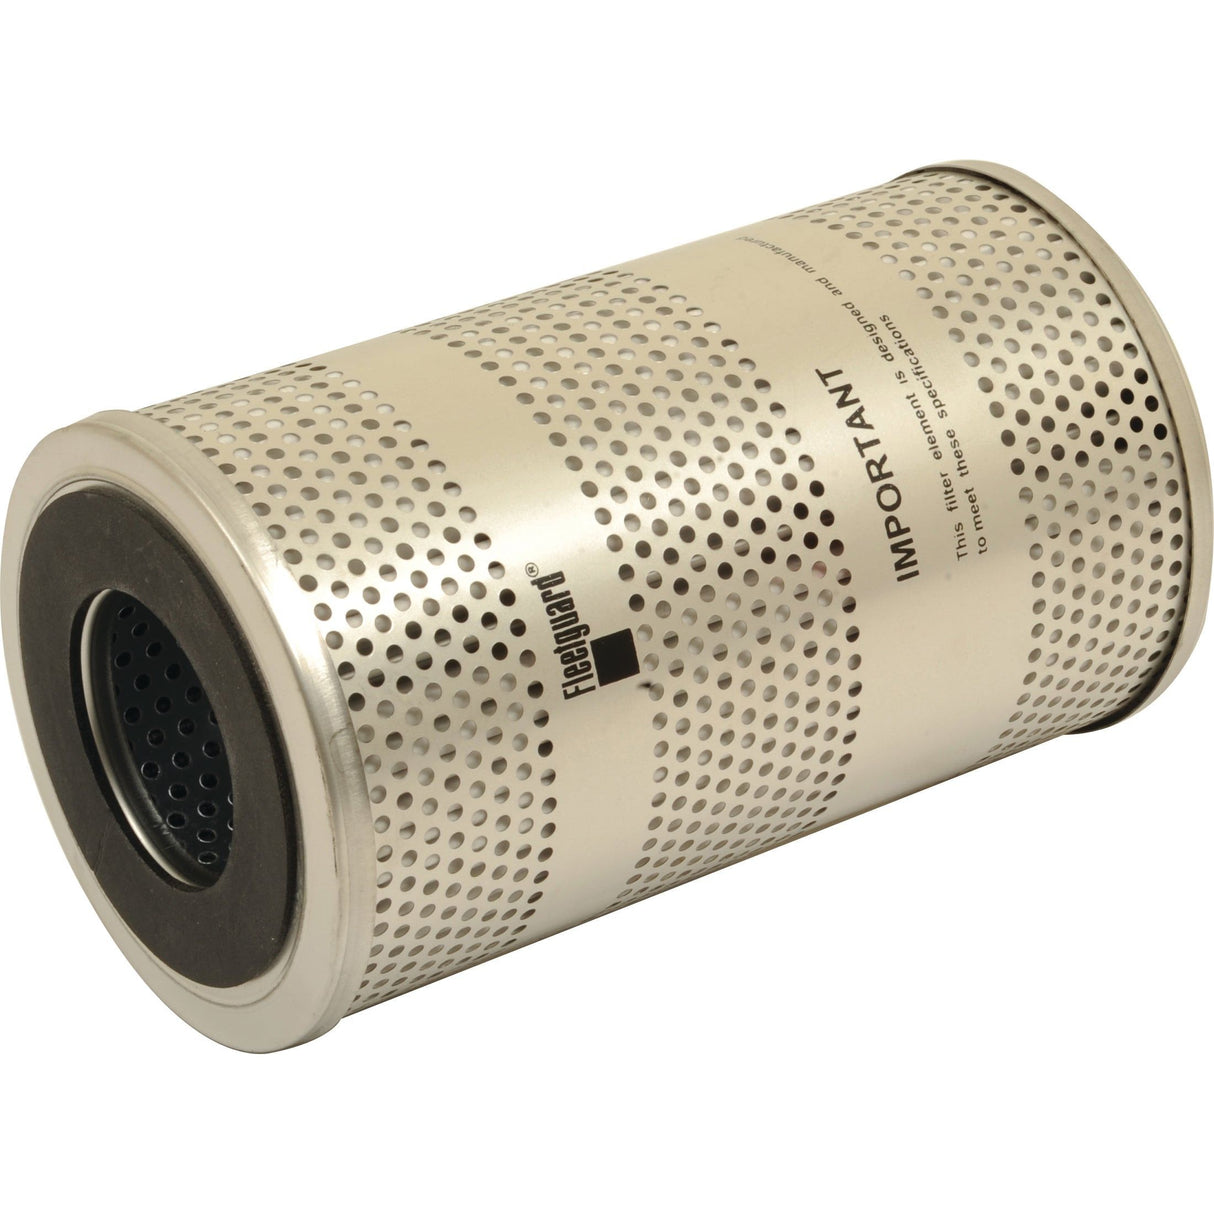 Hydraulic Filter - Element - HF6184
 - S.76694 - Farming Parts